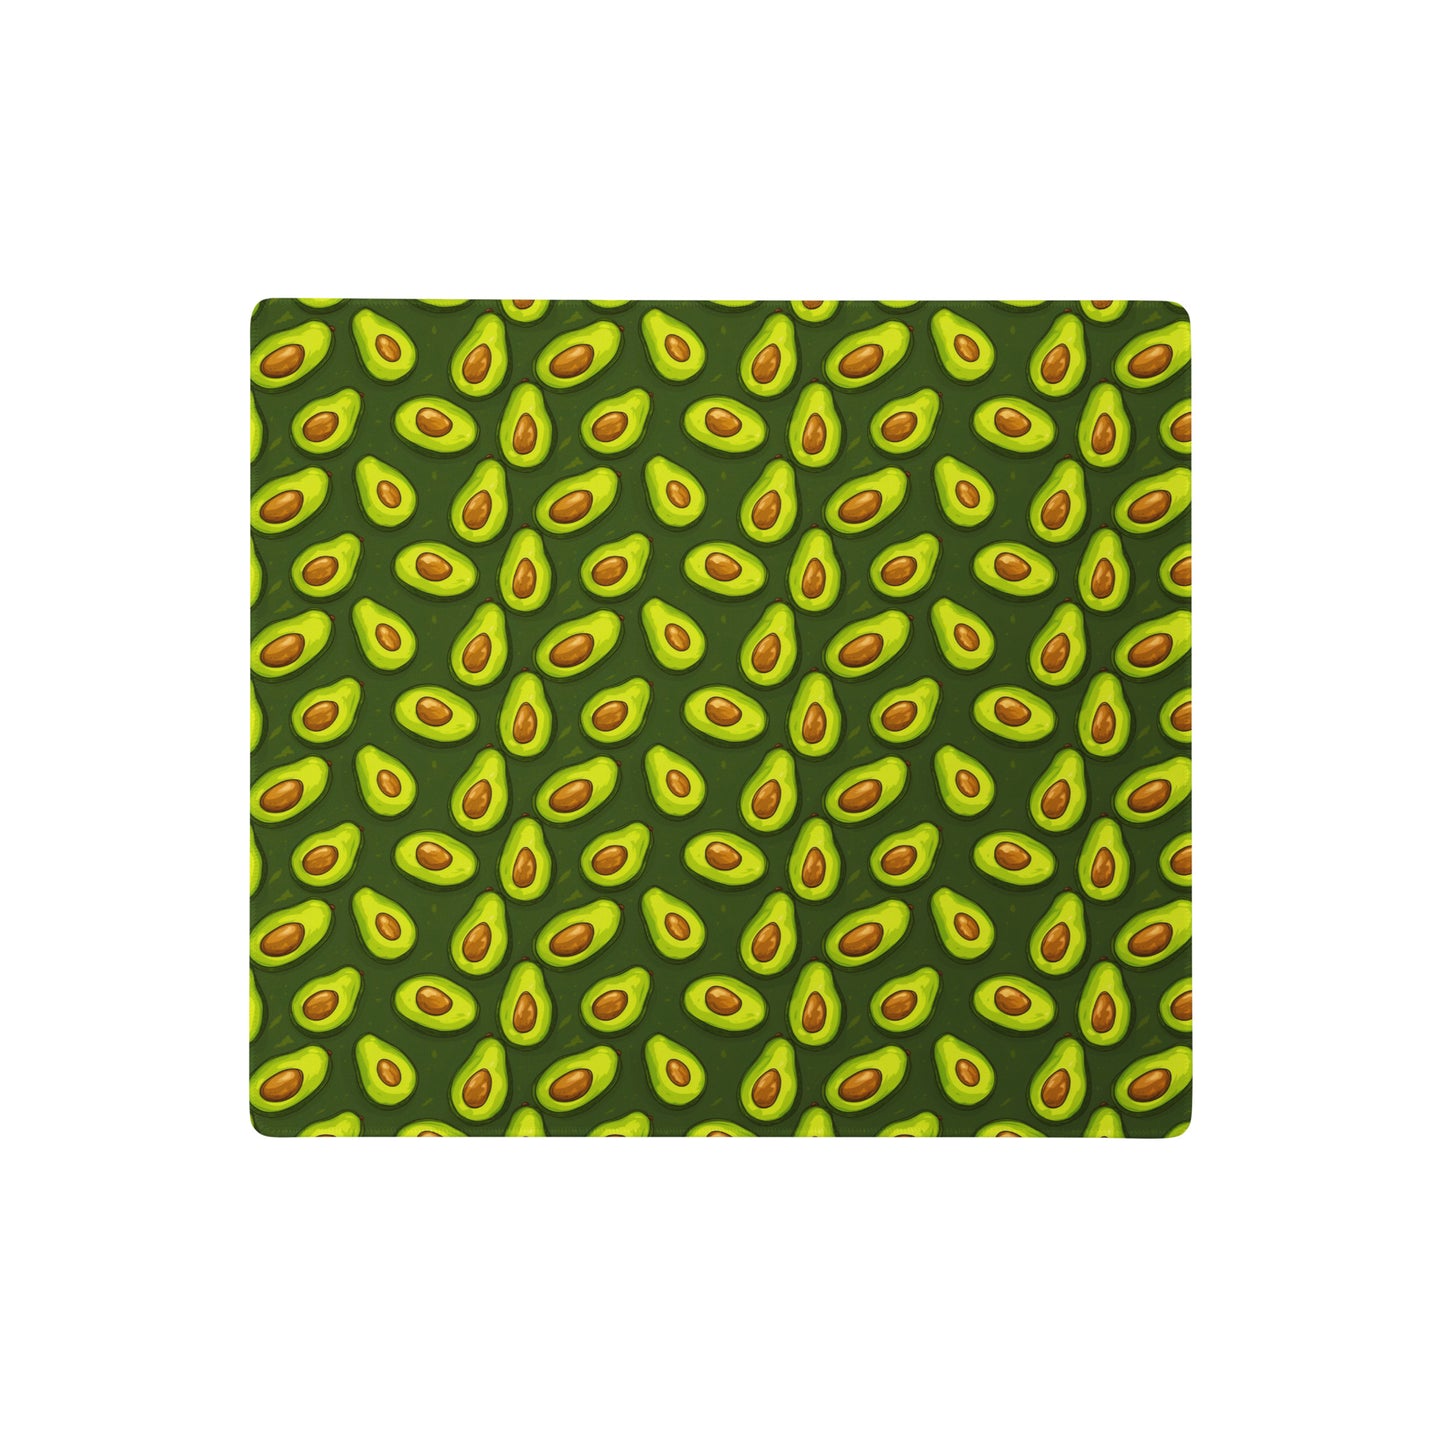 An 18" x 16" desk pad with lots of avocados on it. Green in color.